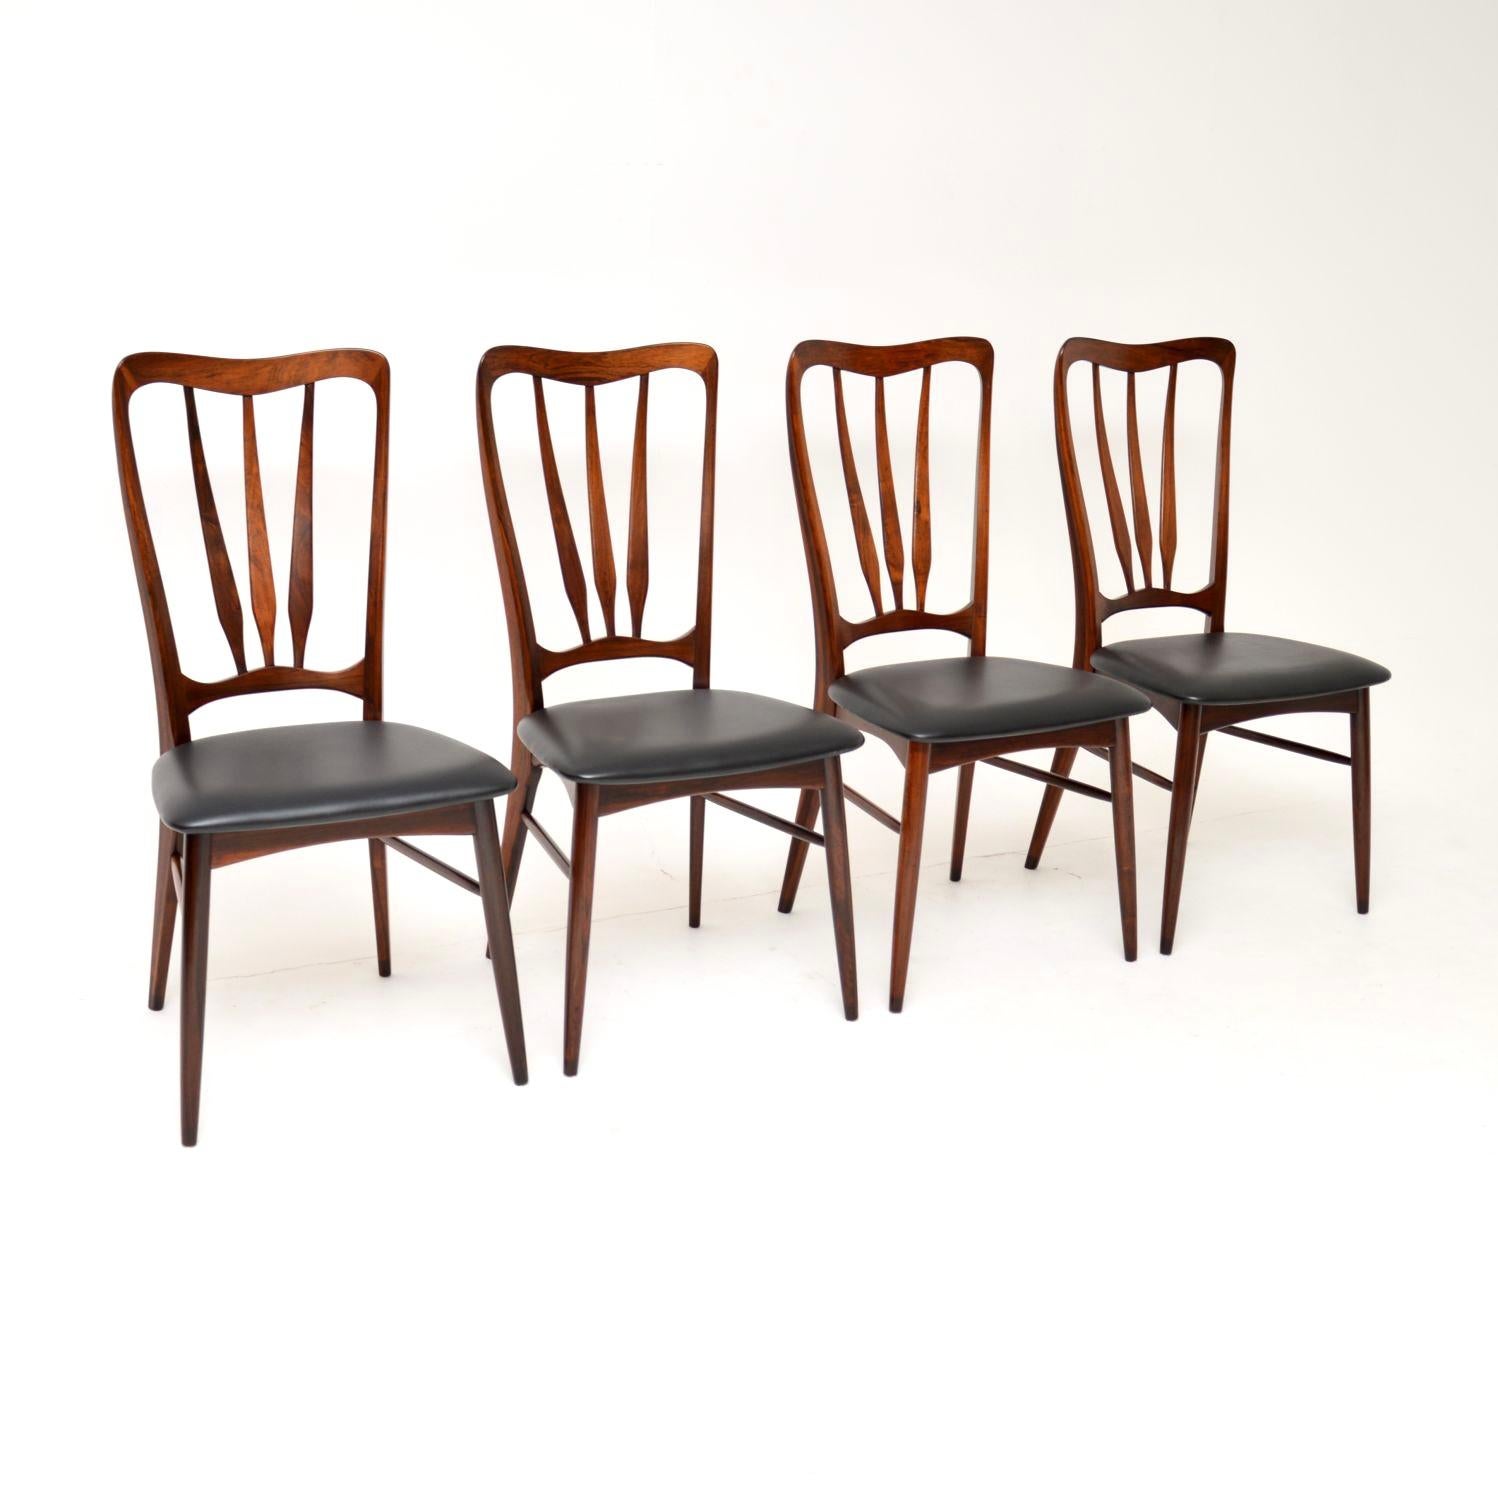 A stunning and rare set of four Danish vintage dining chairs. They were designed by Niels Koefoed, this model is called the ‘Ingrid’ chair, they were made in the 1960’s.

They are beautifully crafted and are of superb quality. The design is